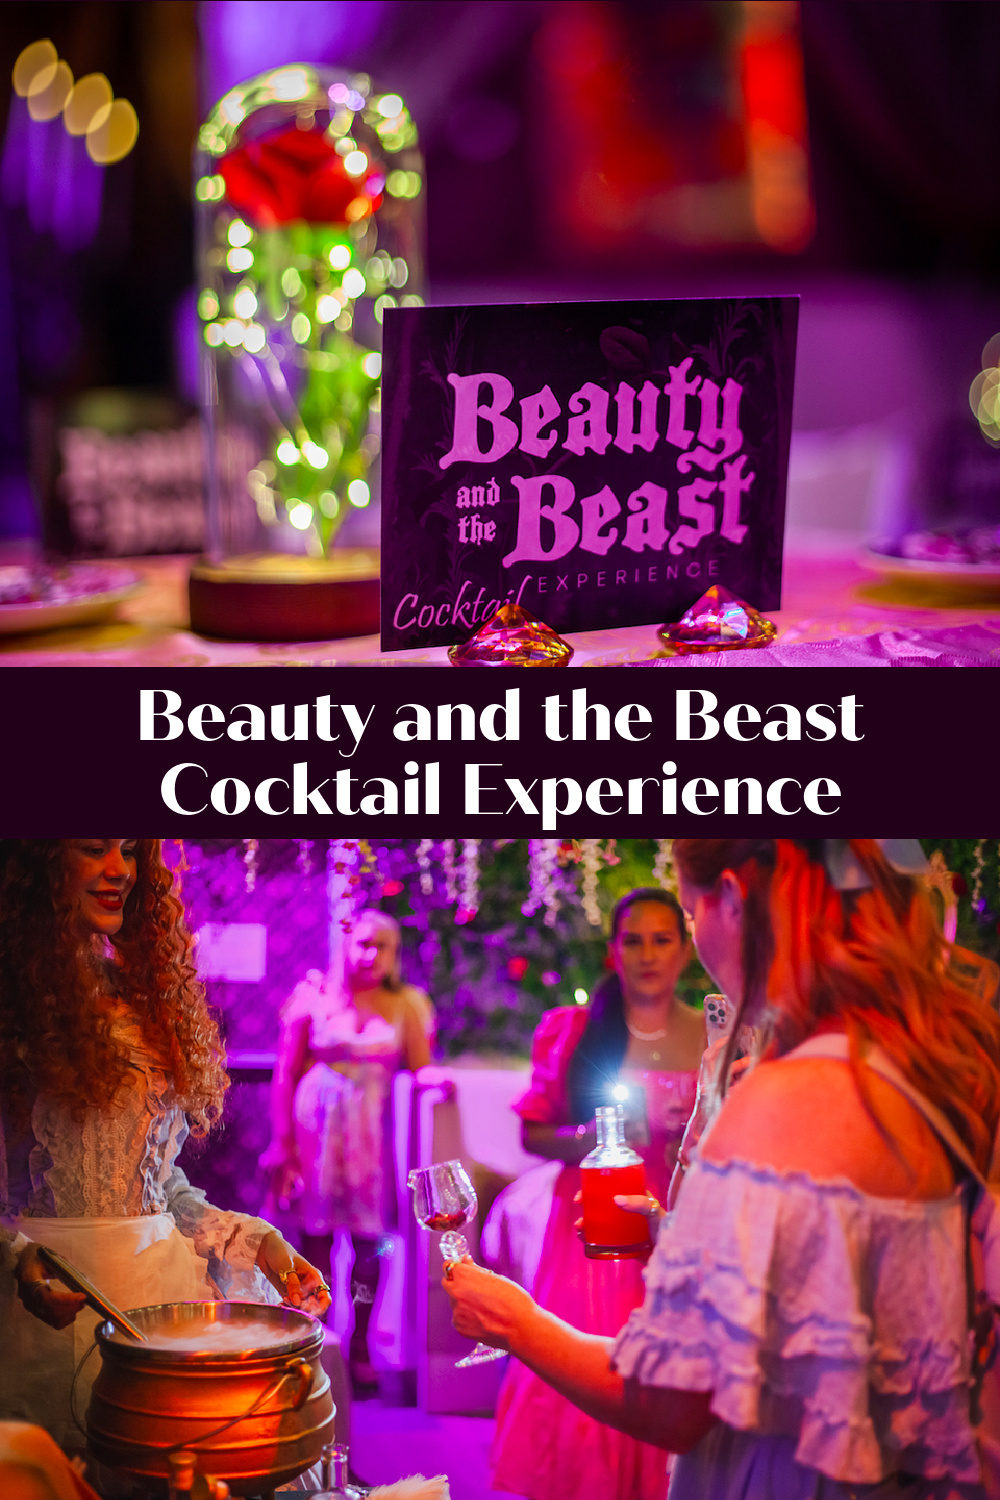 Beauty and the Beast Cocktail Experience